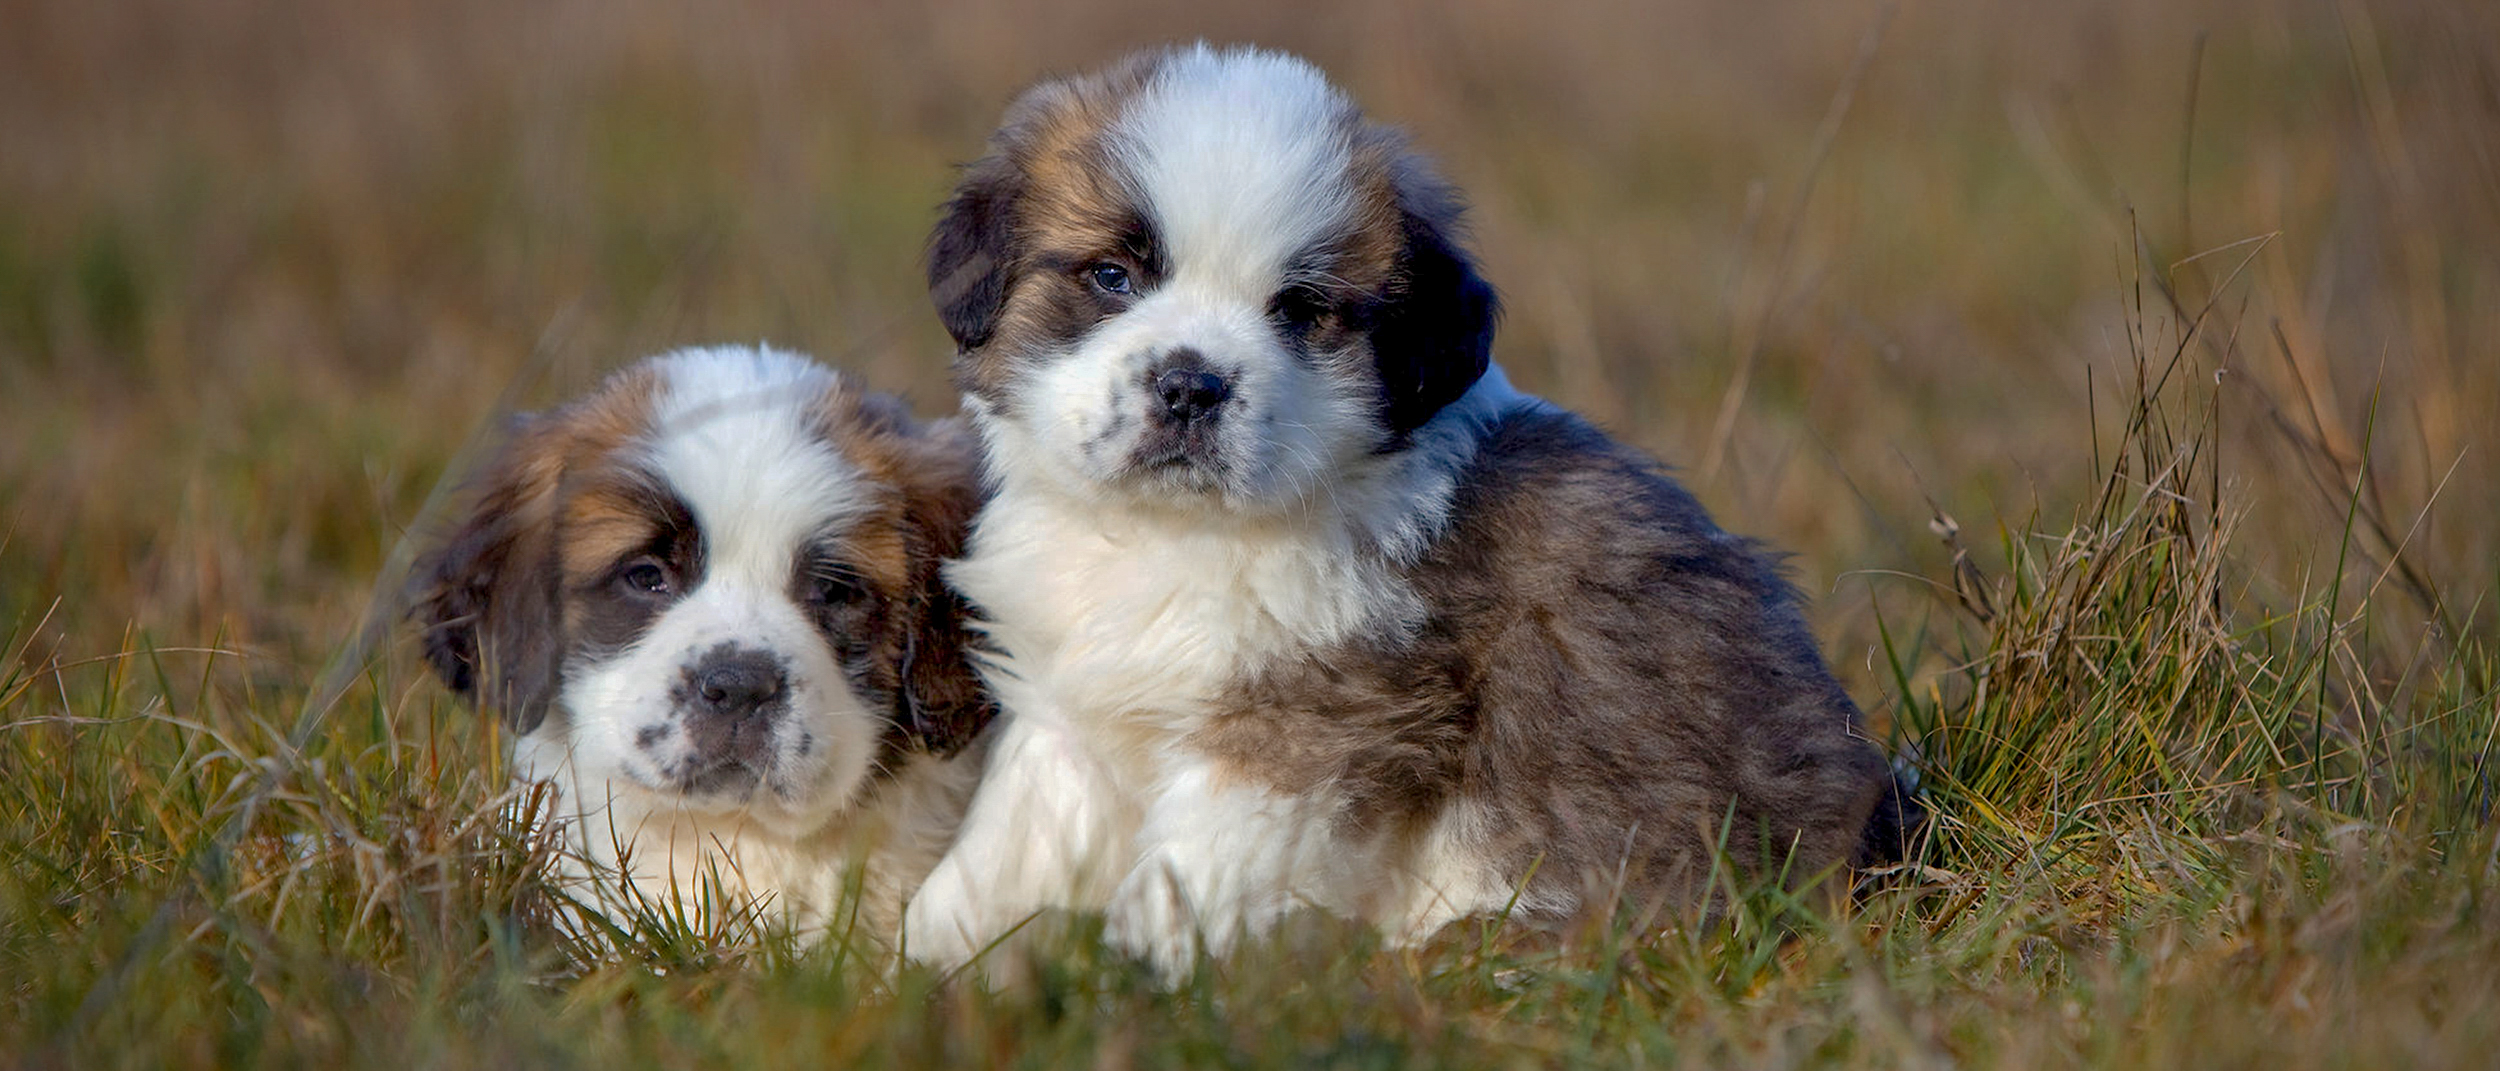 Puppy Saint Bernards sitting together in a field.